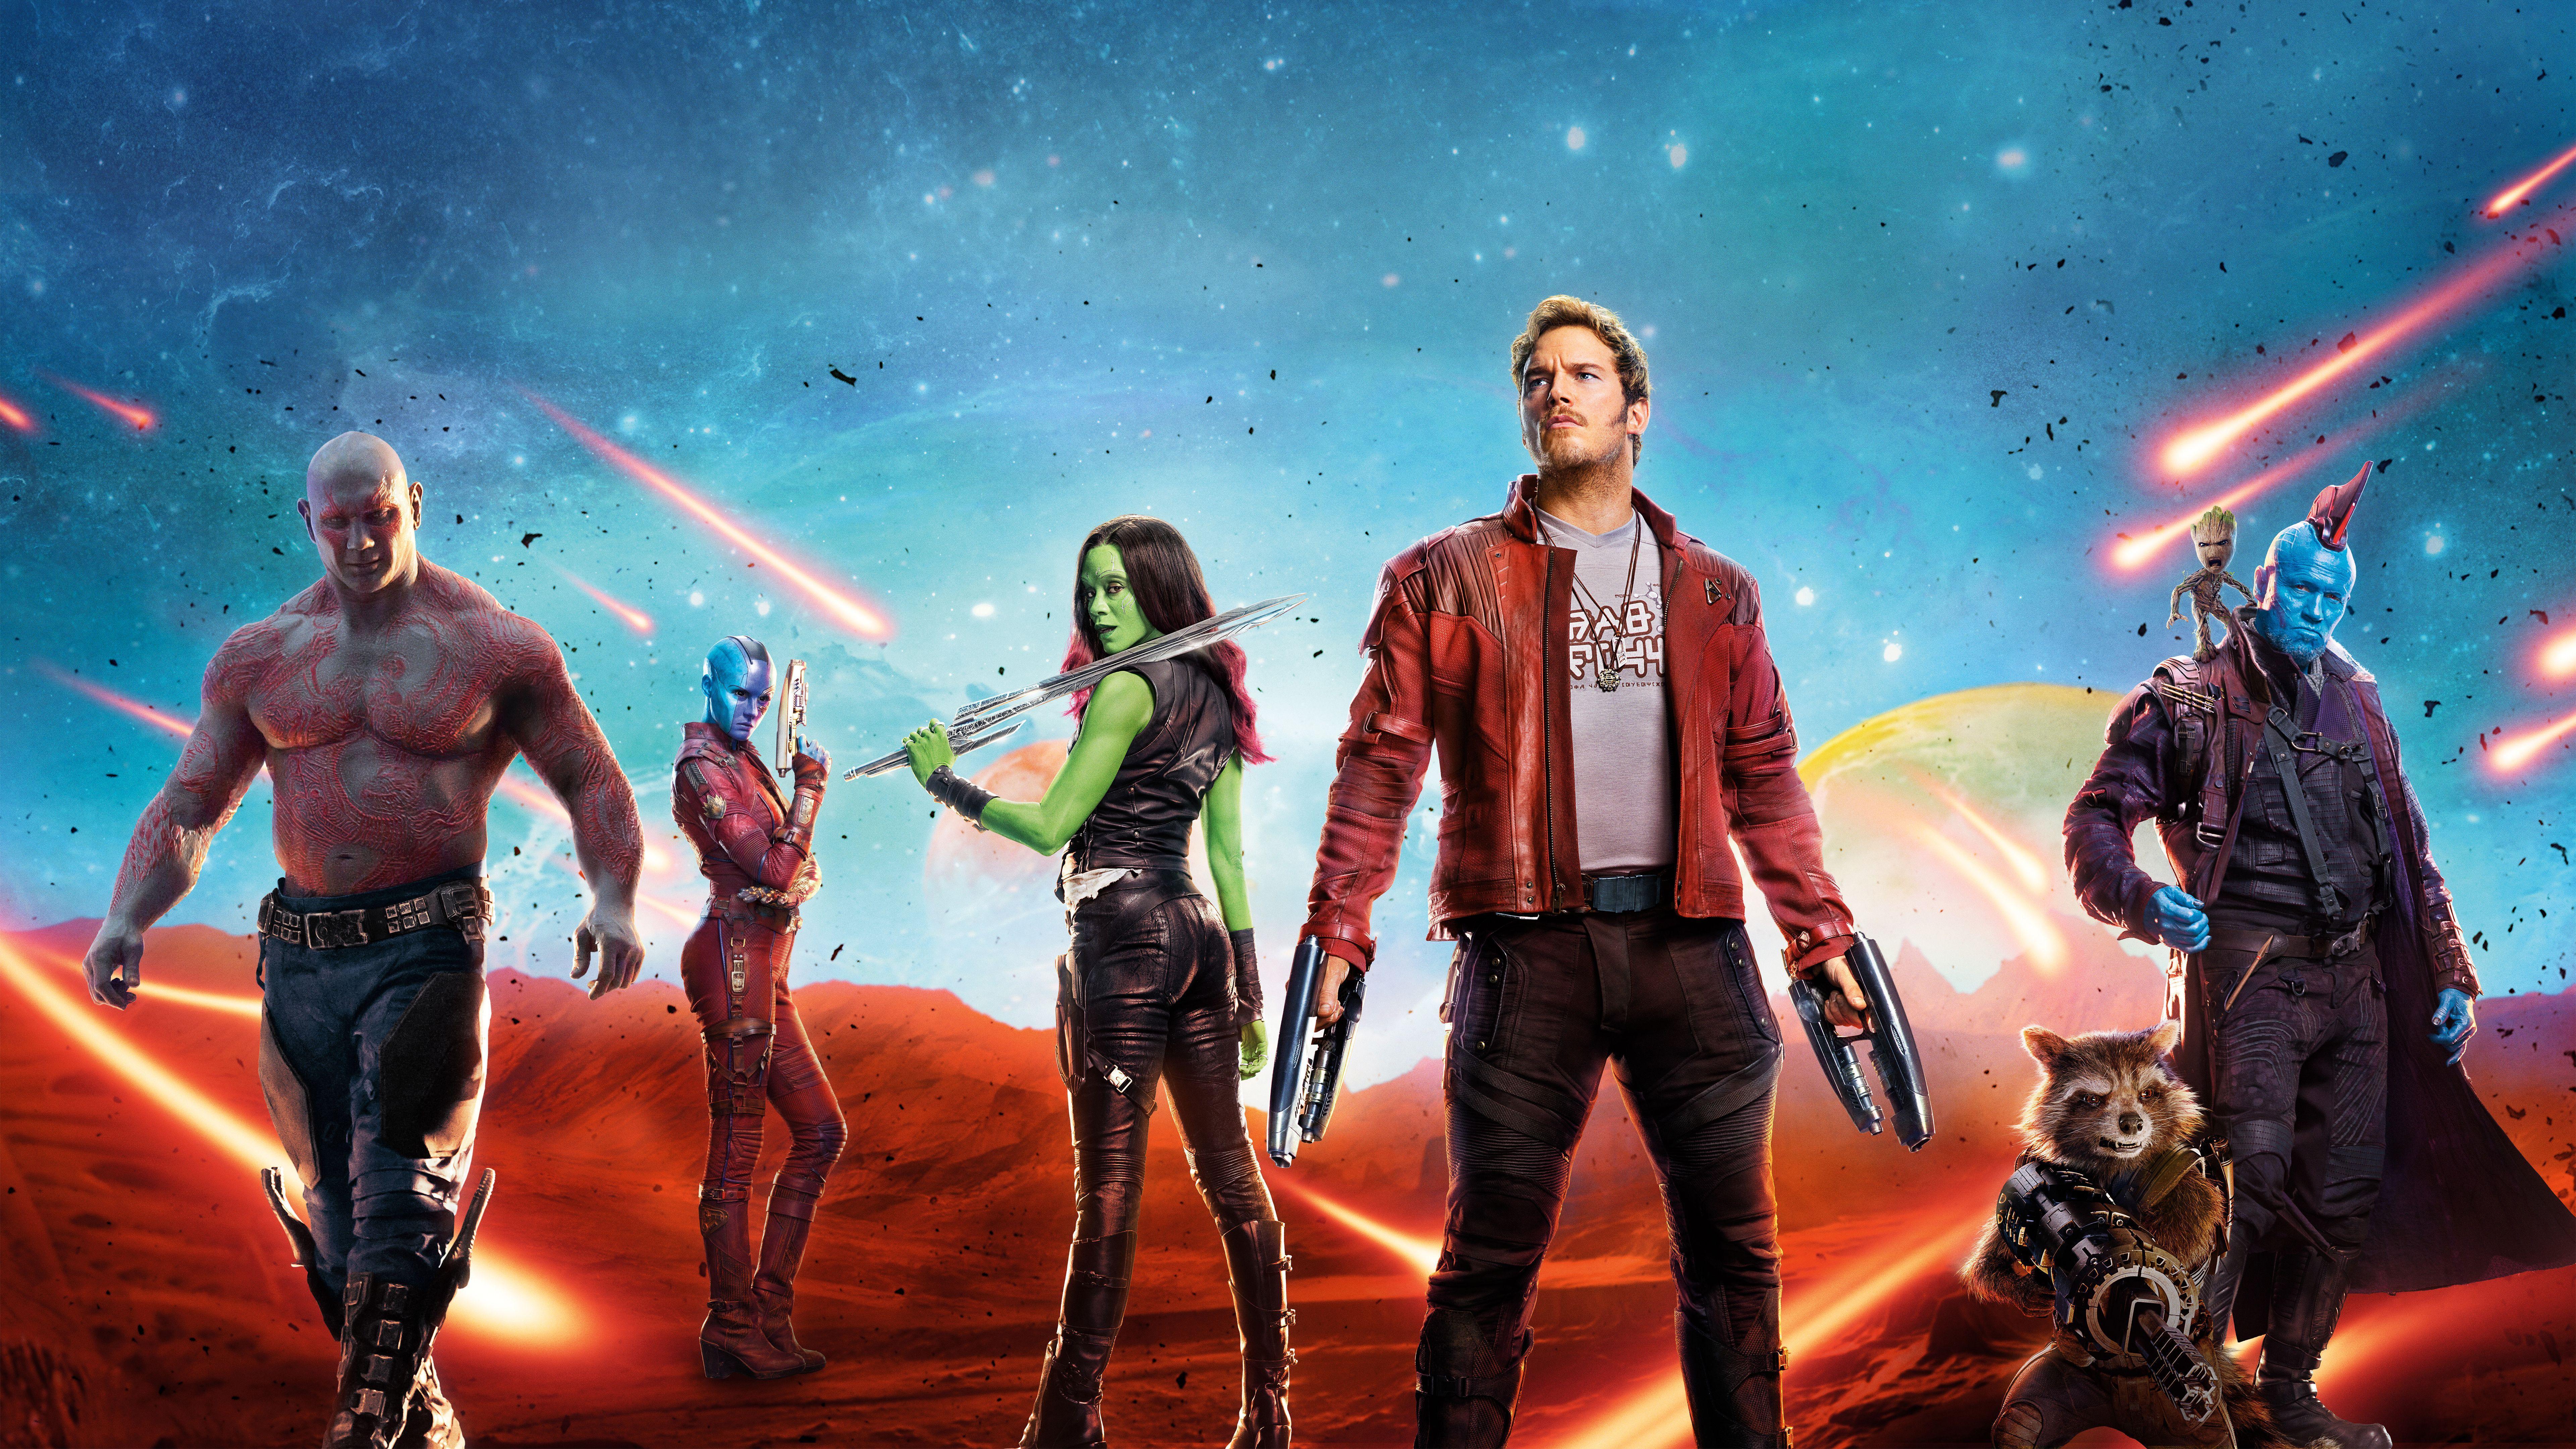 Guardians Of The Galaxy Vol. 2 Wallpapers - Wallpaper Cave